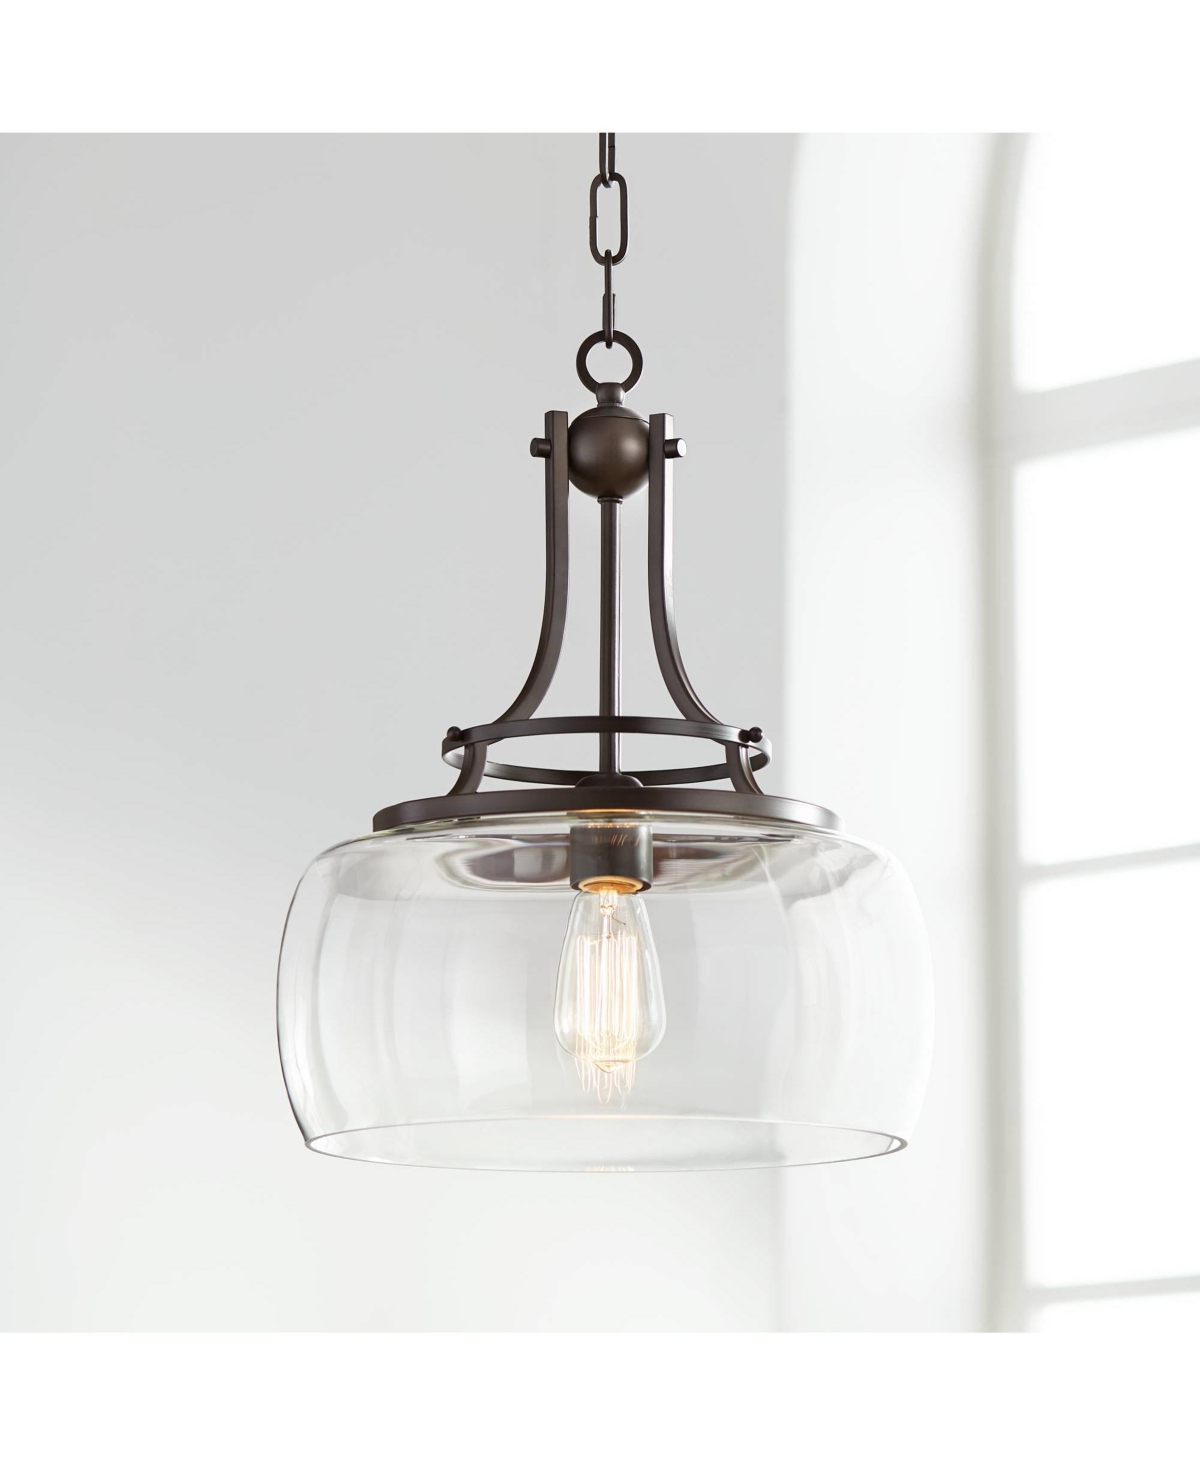 Franklin Iron Works Charleston Bronze Brown Small Pendant Light 13.5" Wide Farmhouse Industrial Rustic Clear Glass Shade